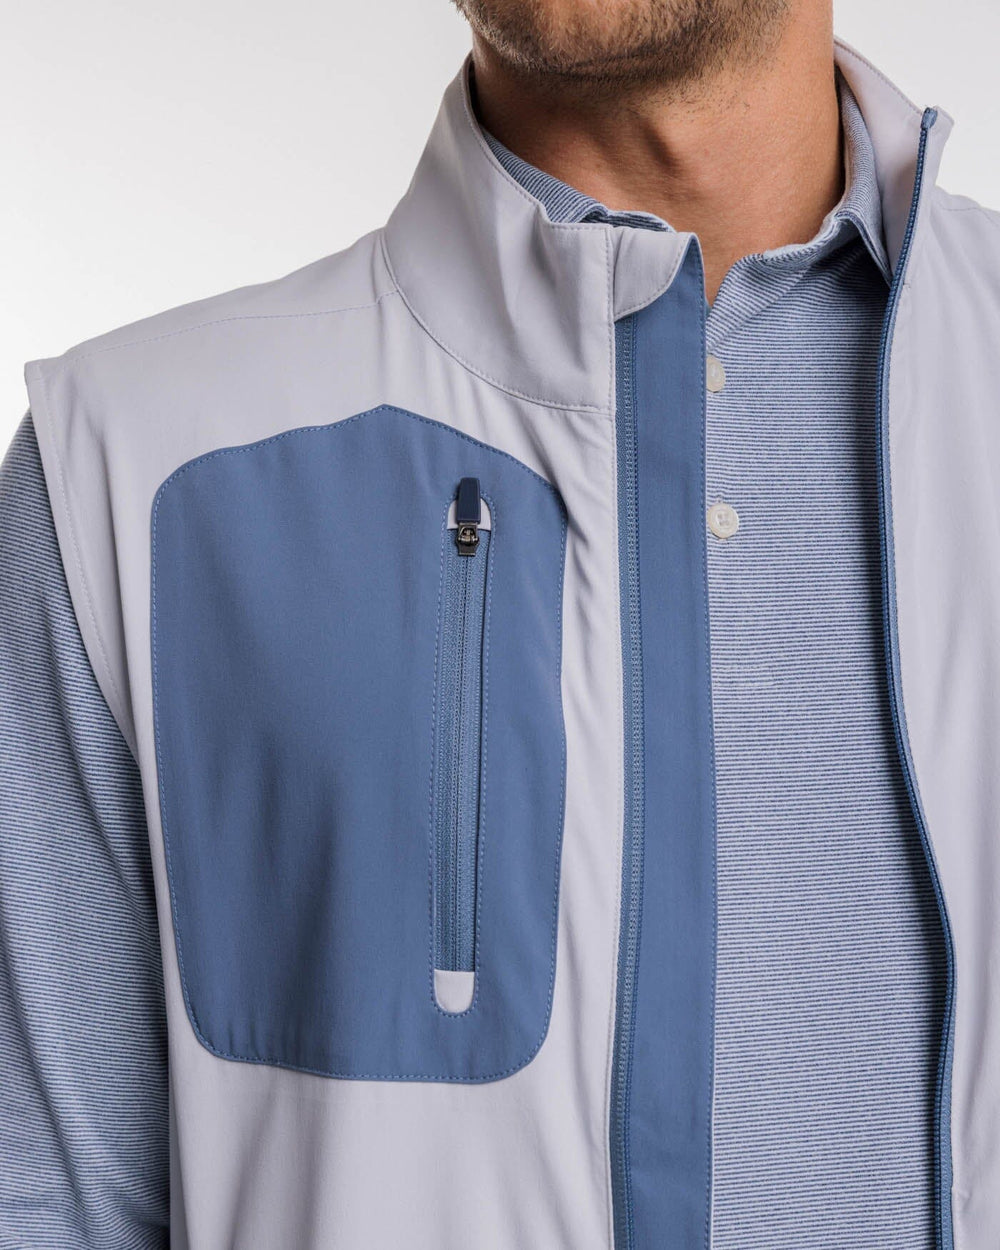 The detail view of the Southern Tide Bowline Performance Vest by Southern Tide - Platinum Grey